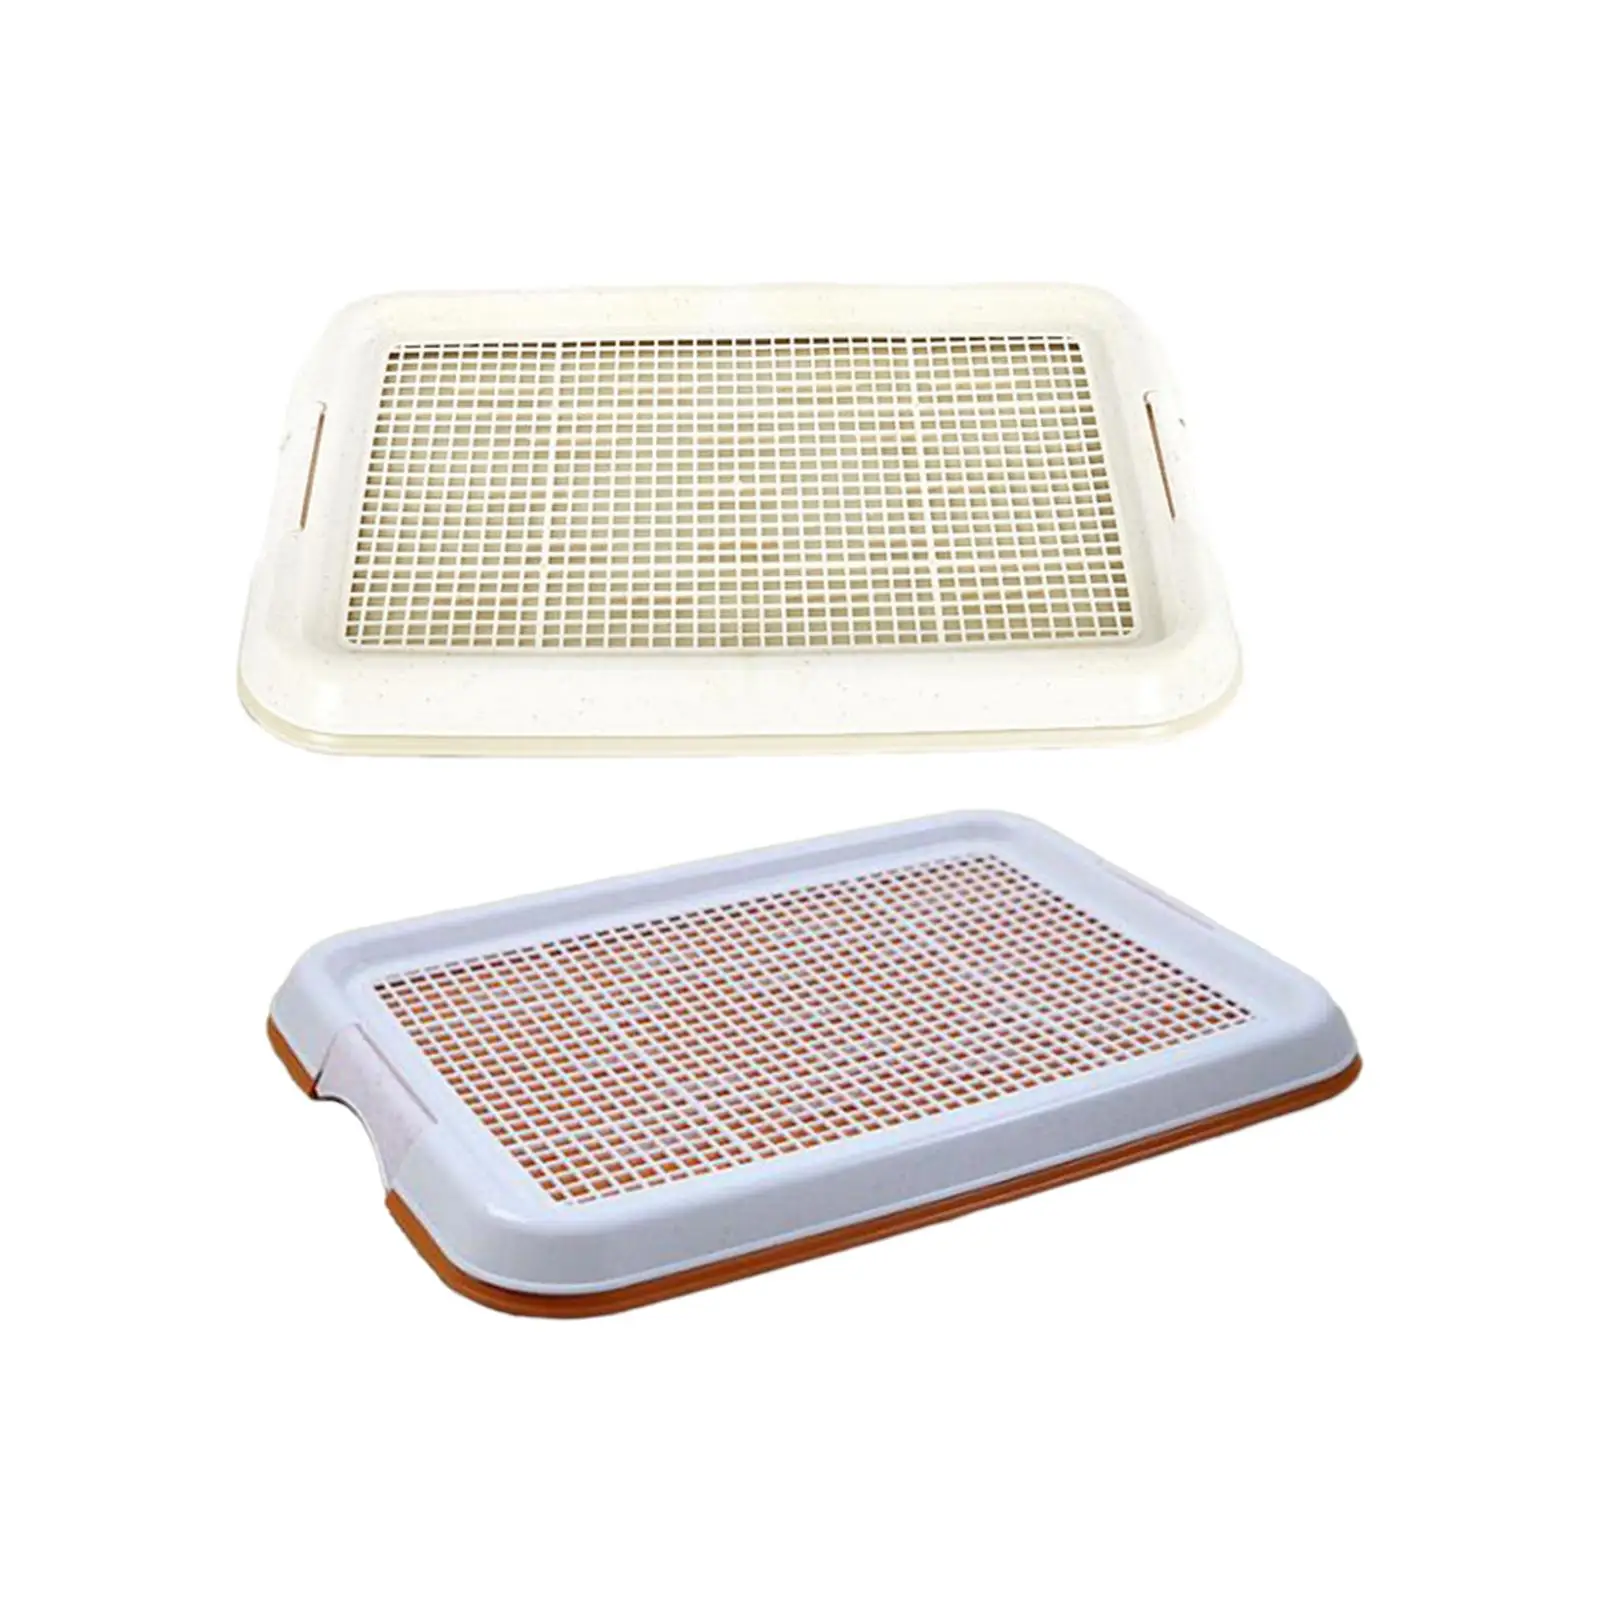 Dog Potty Toilet Removable Indoor Outdoor Anti Slip Potty Trainer Corner Puppy Pee Pad Holder Mesh Training Tray for Small Dogs